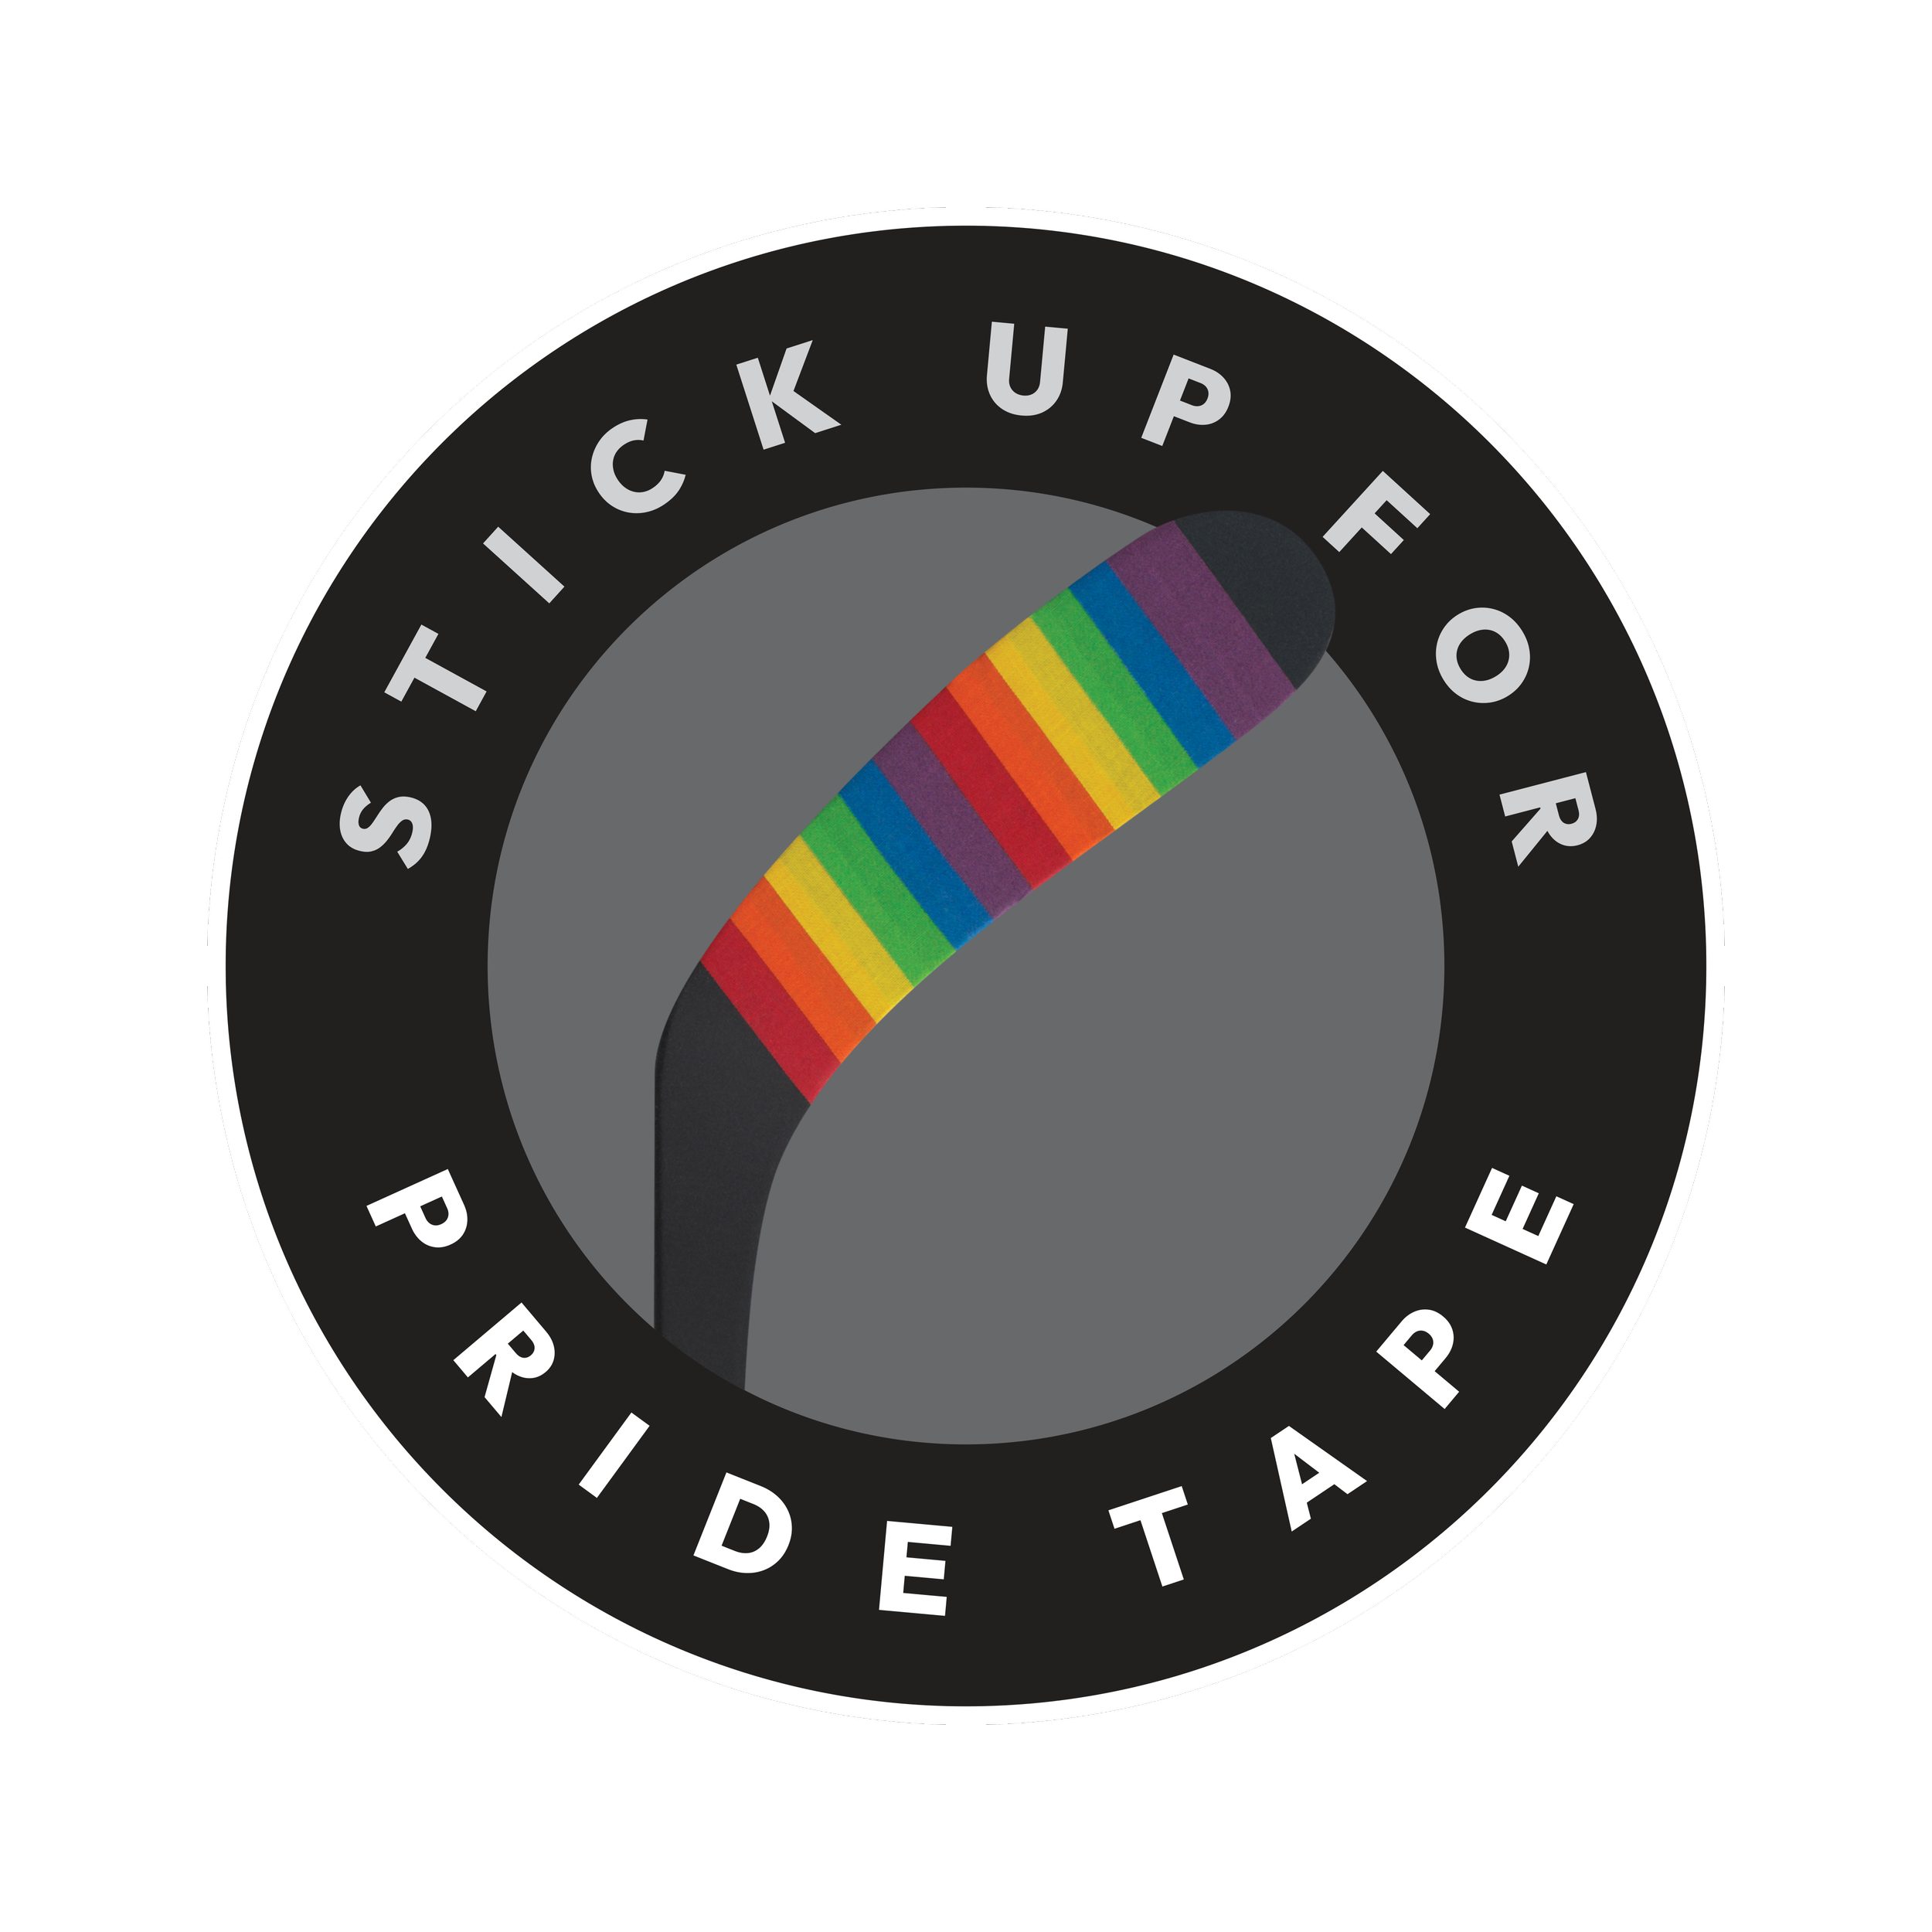 Pride Tape  Sports Tape that promotes Equality and Inclusion through sport